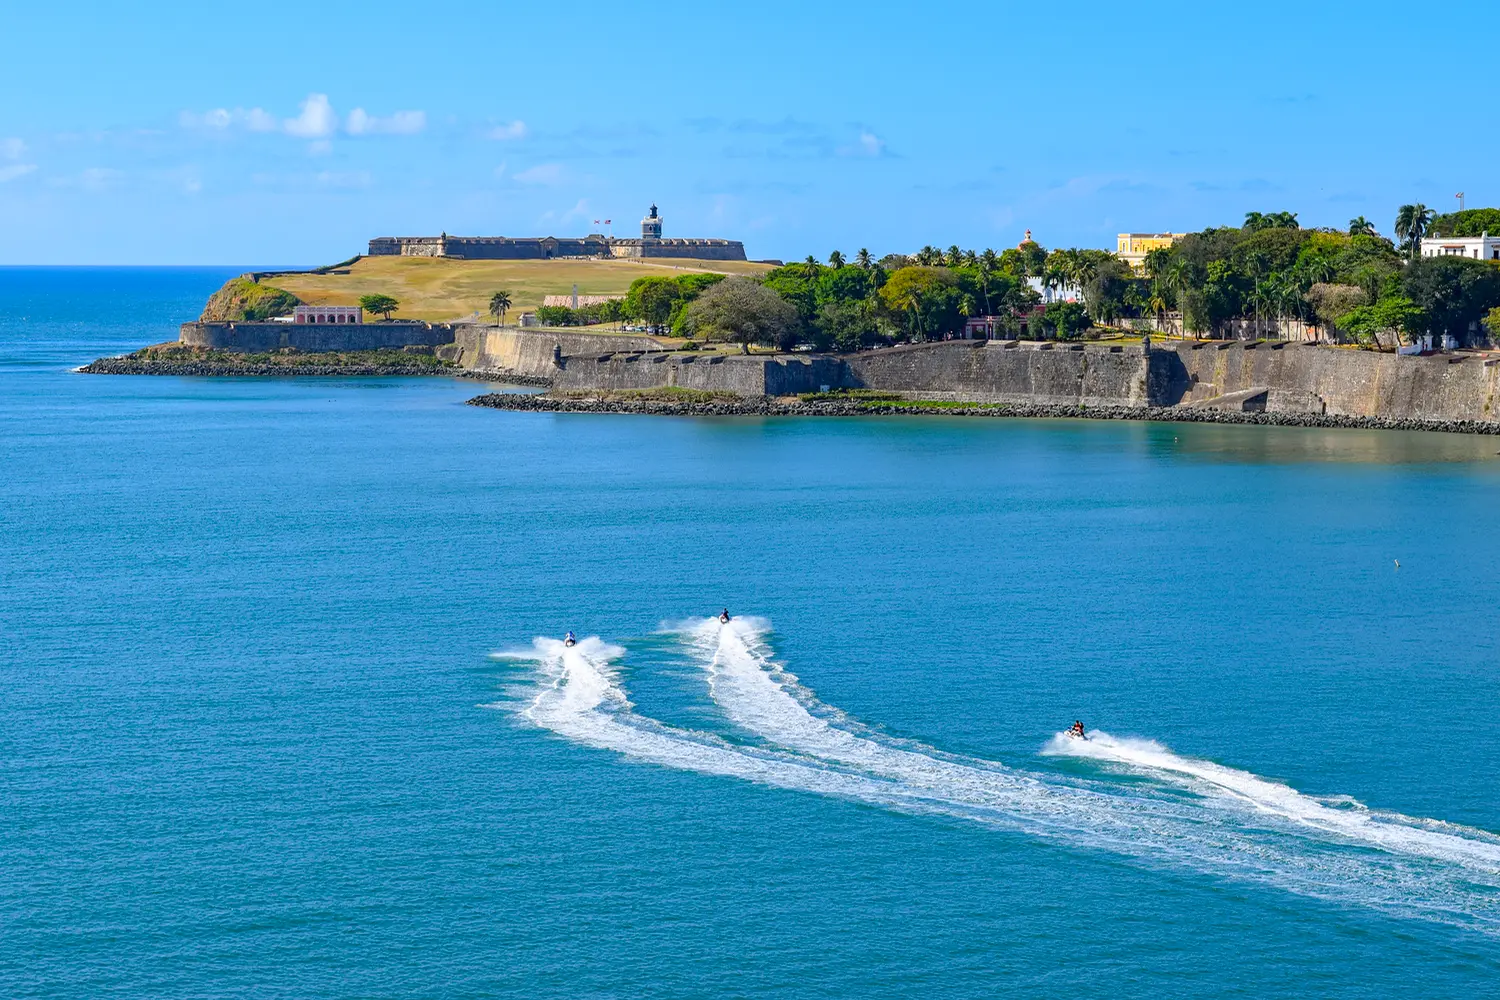 View of the promontory where the historic Castillo San Felipe del Morro is located in Old San Juan, as jet ski riders approach that direction.